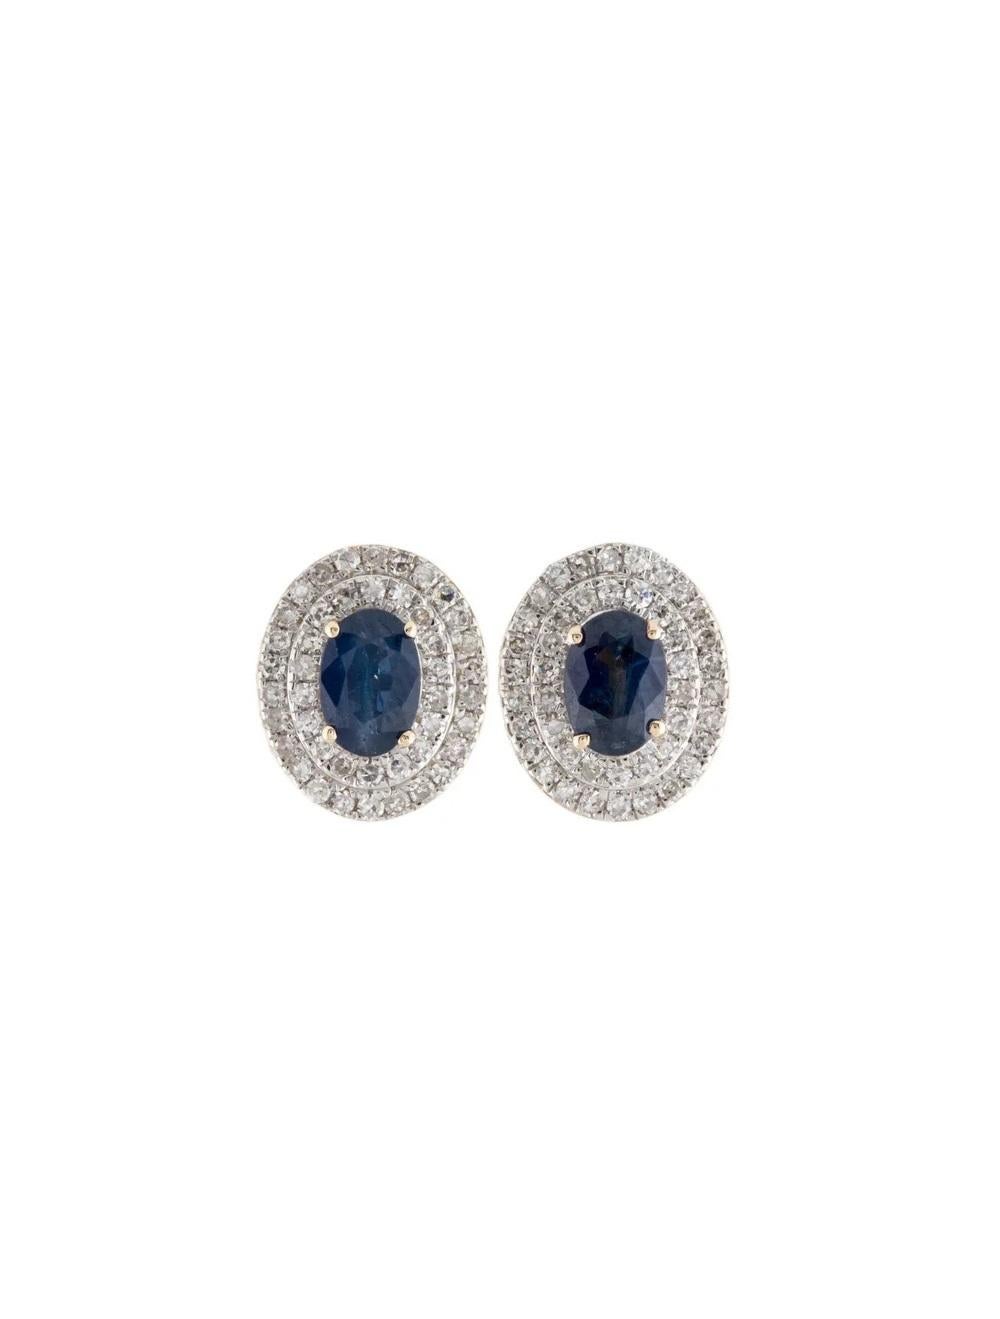 14K Sapphire Diamond Stud Earrings - Luxury Statement Jewelry, Stunning Piece In New Condition For Sale In Holtsville, NY